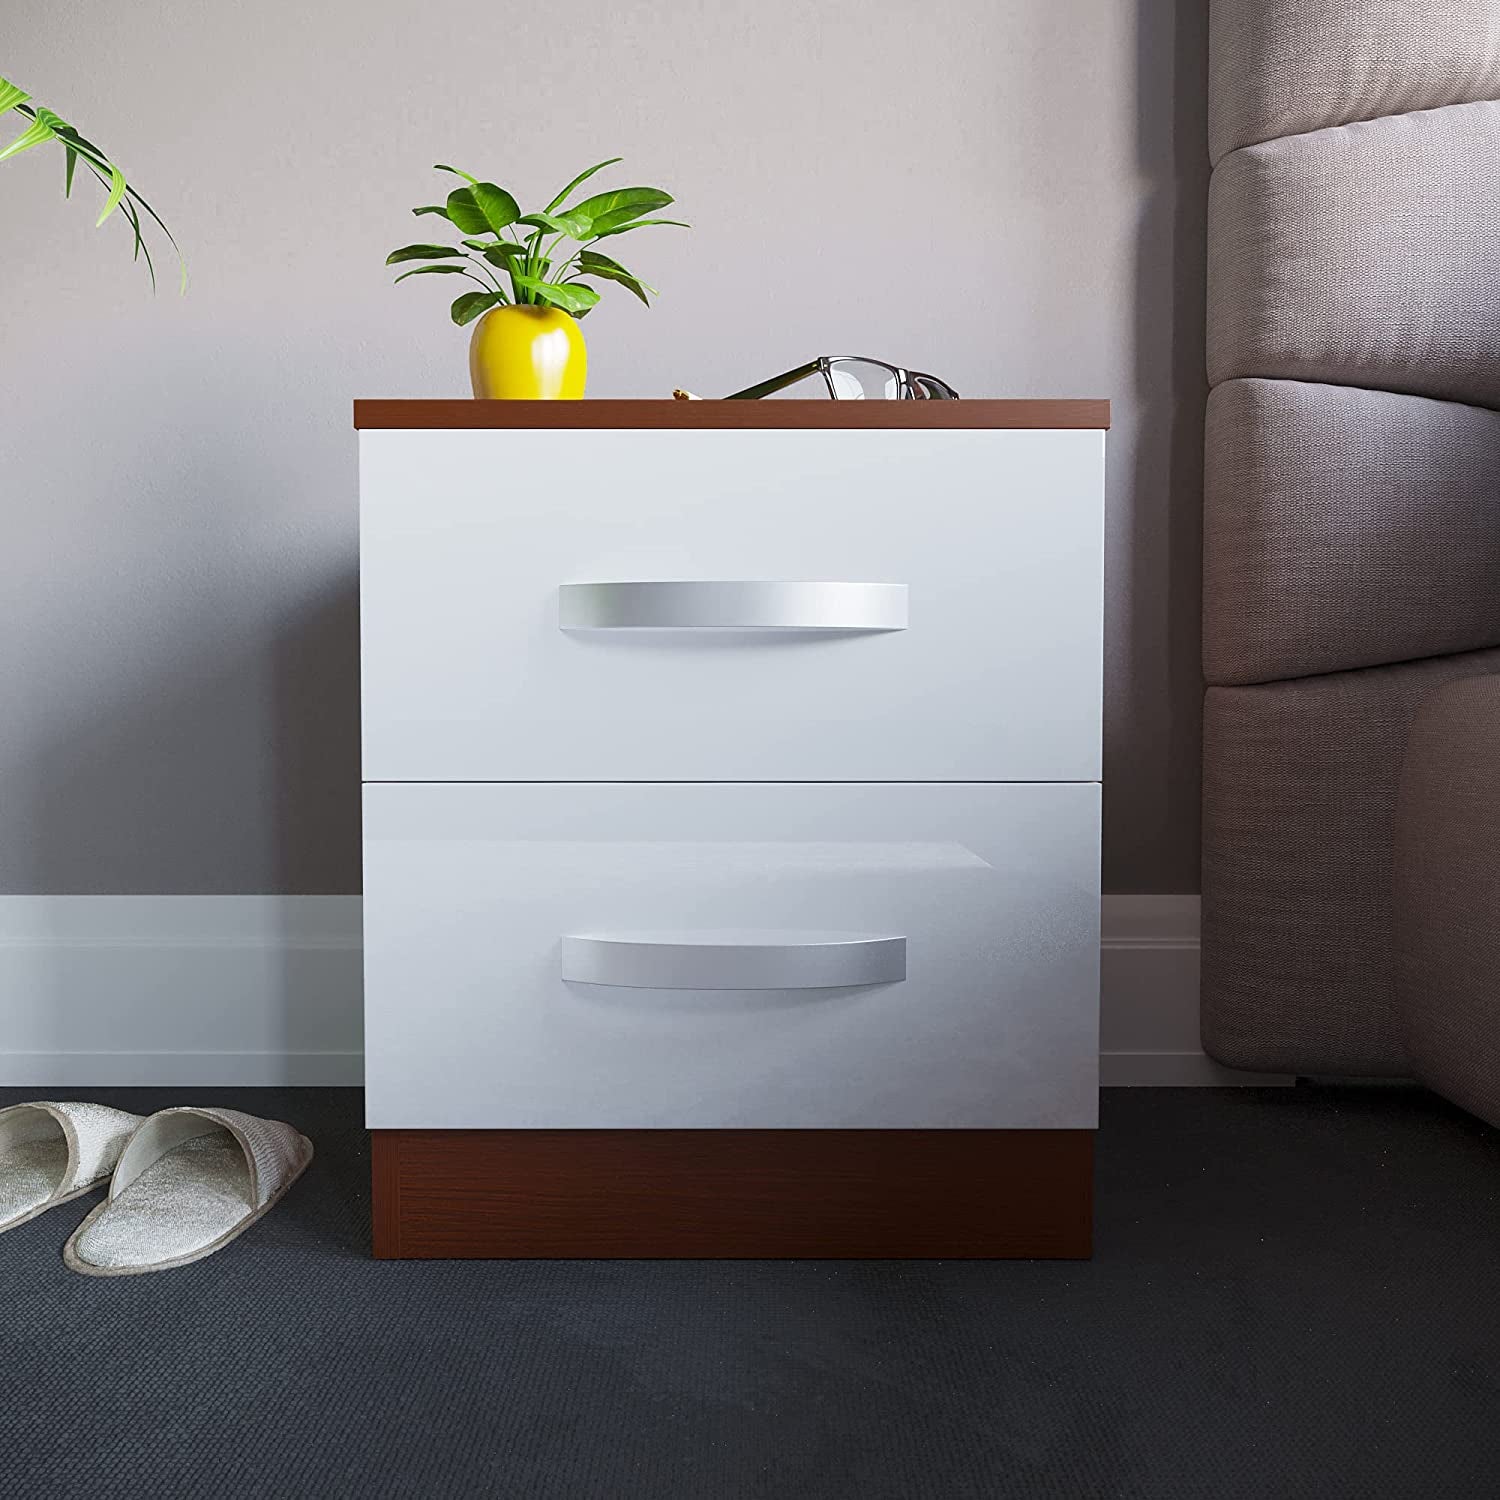 Amazon Brand - Movian High Gloss 2 Drawer Bedside Cabinet, White and Walnut, 47 X 40 X 36 Cm